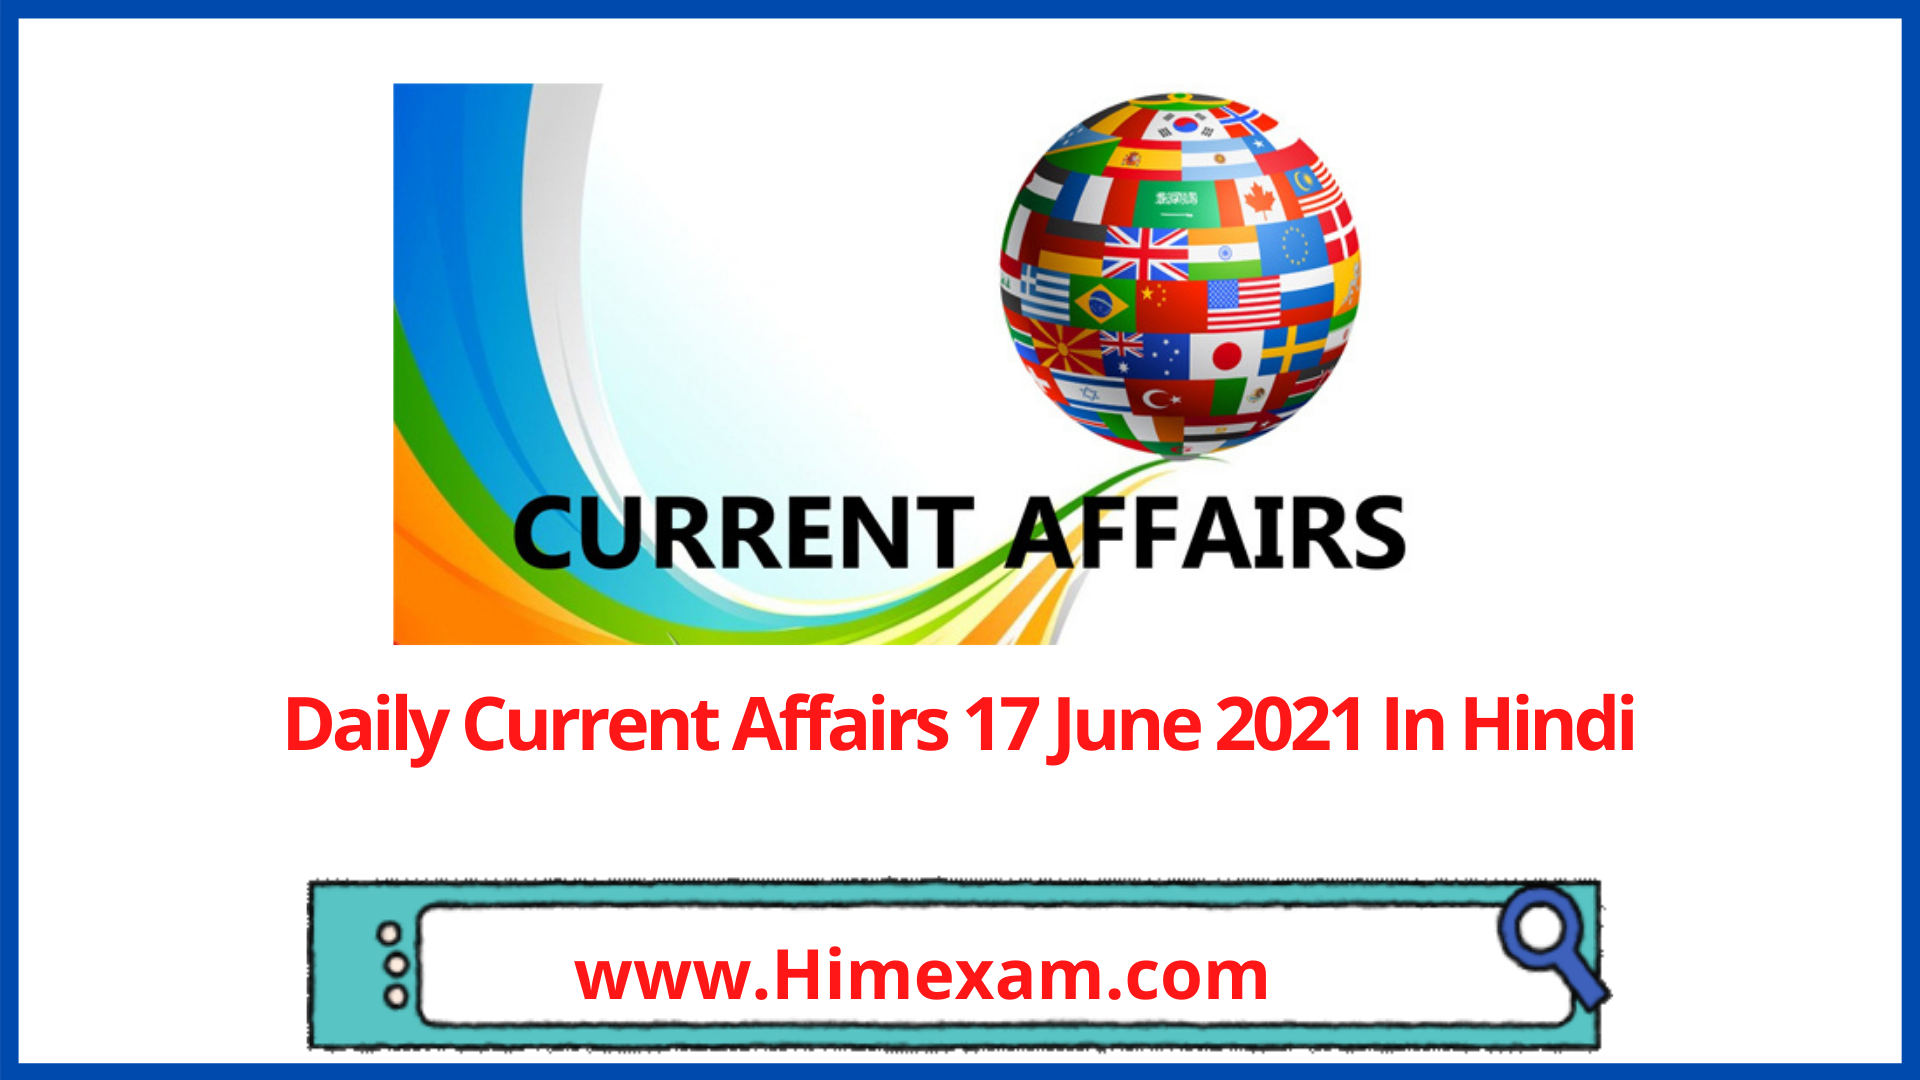 Daily Current Affairs 17 June 2021 In Hindi